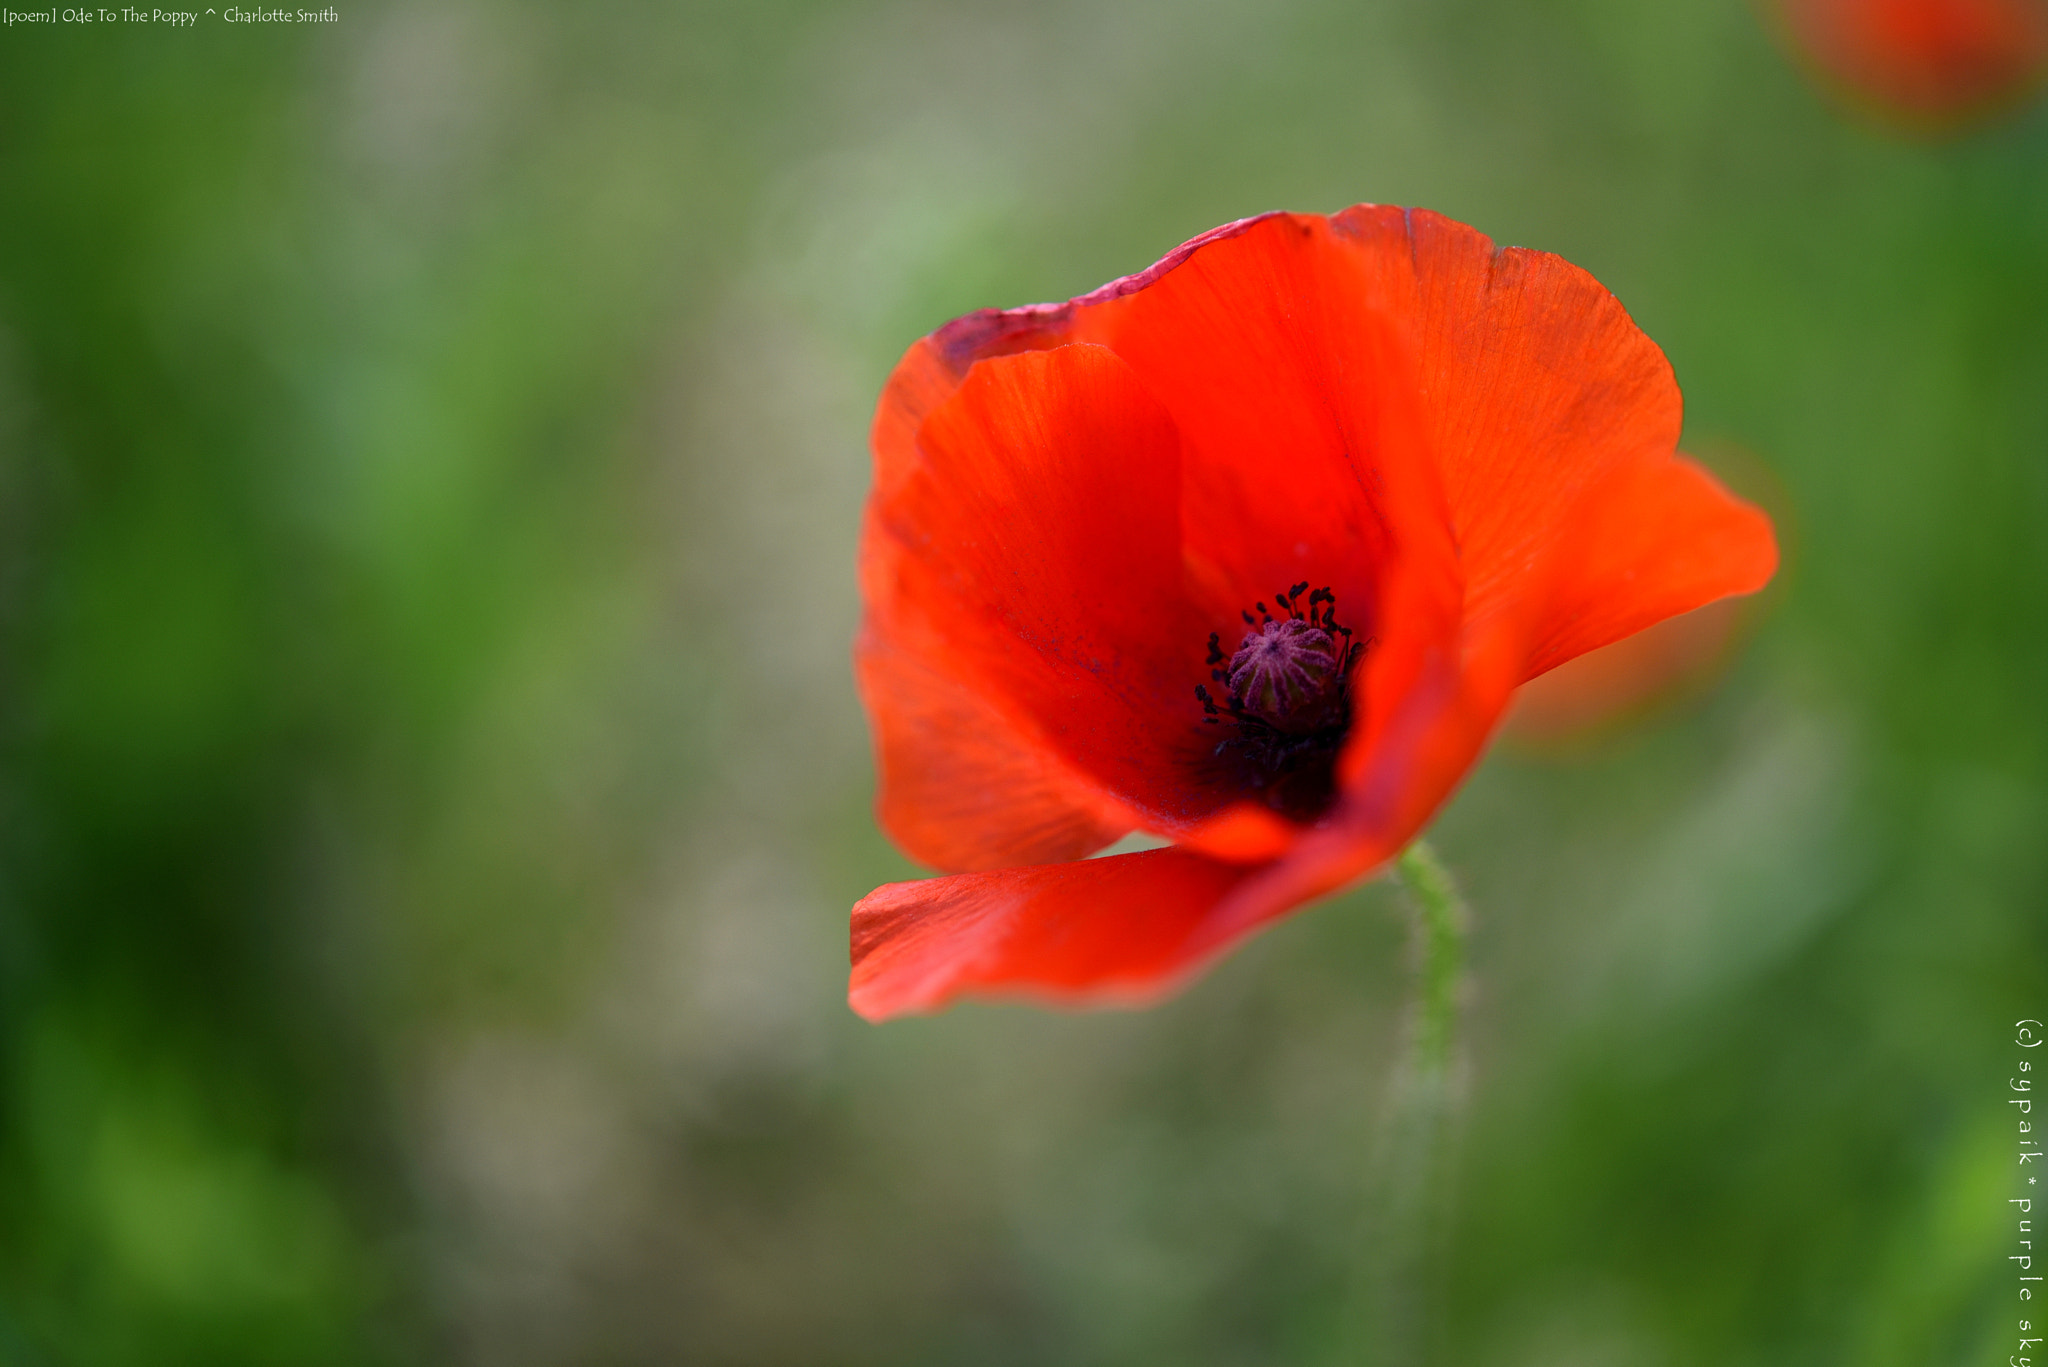 Nikon D750 + Nikon AF-S Micro-Nikkor 60mm F2.8G ED sample photo. Ode to the poppy ** photography